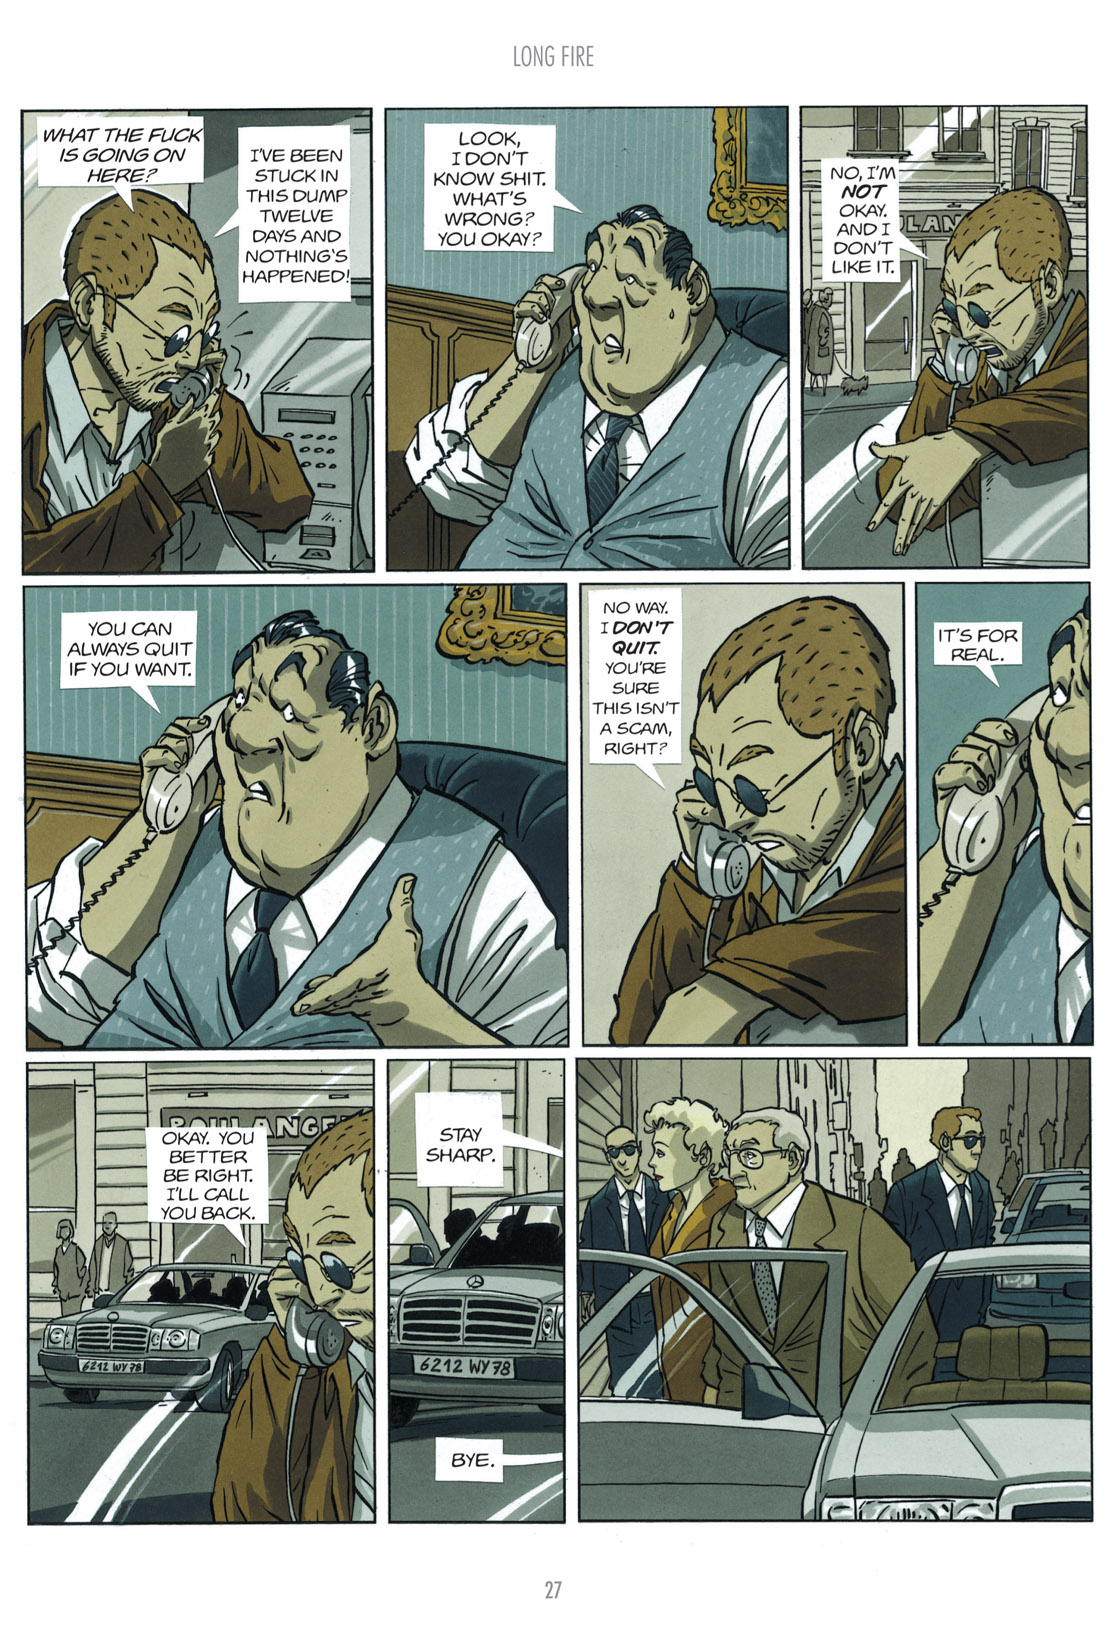 Read online The Killer comic -  Issue # TPB 1 - 66